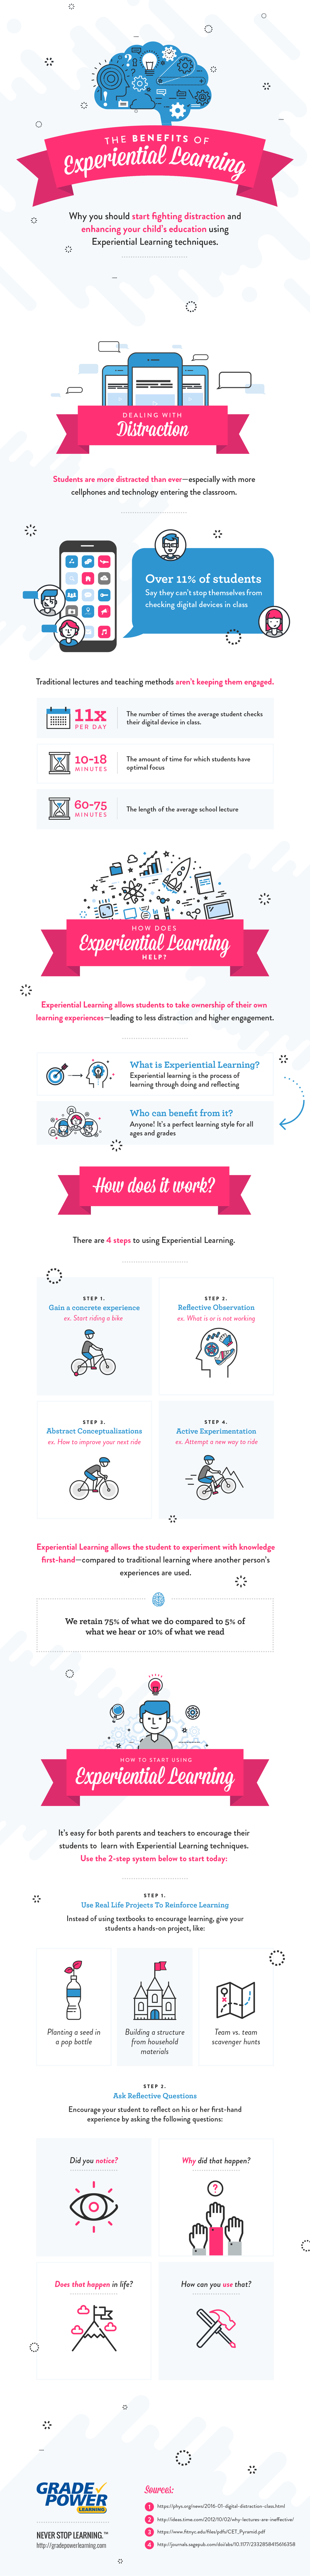 Infographic on the benefits of Experiential Learning, including activities and examples